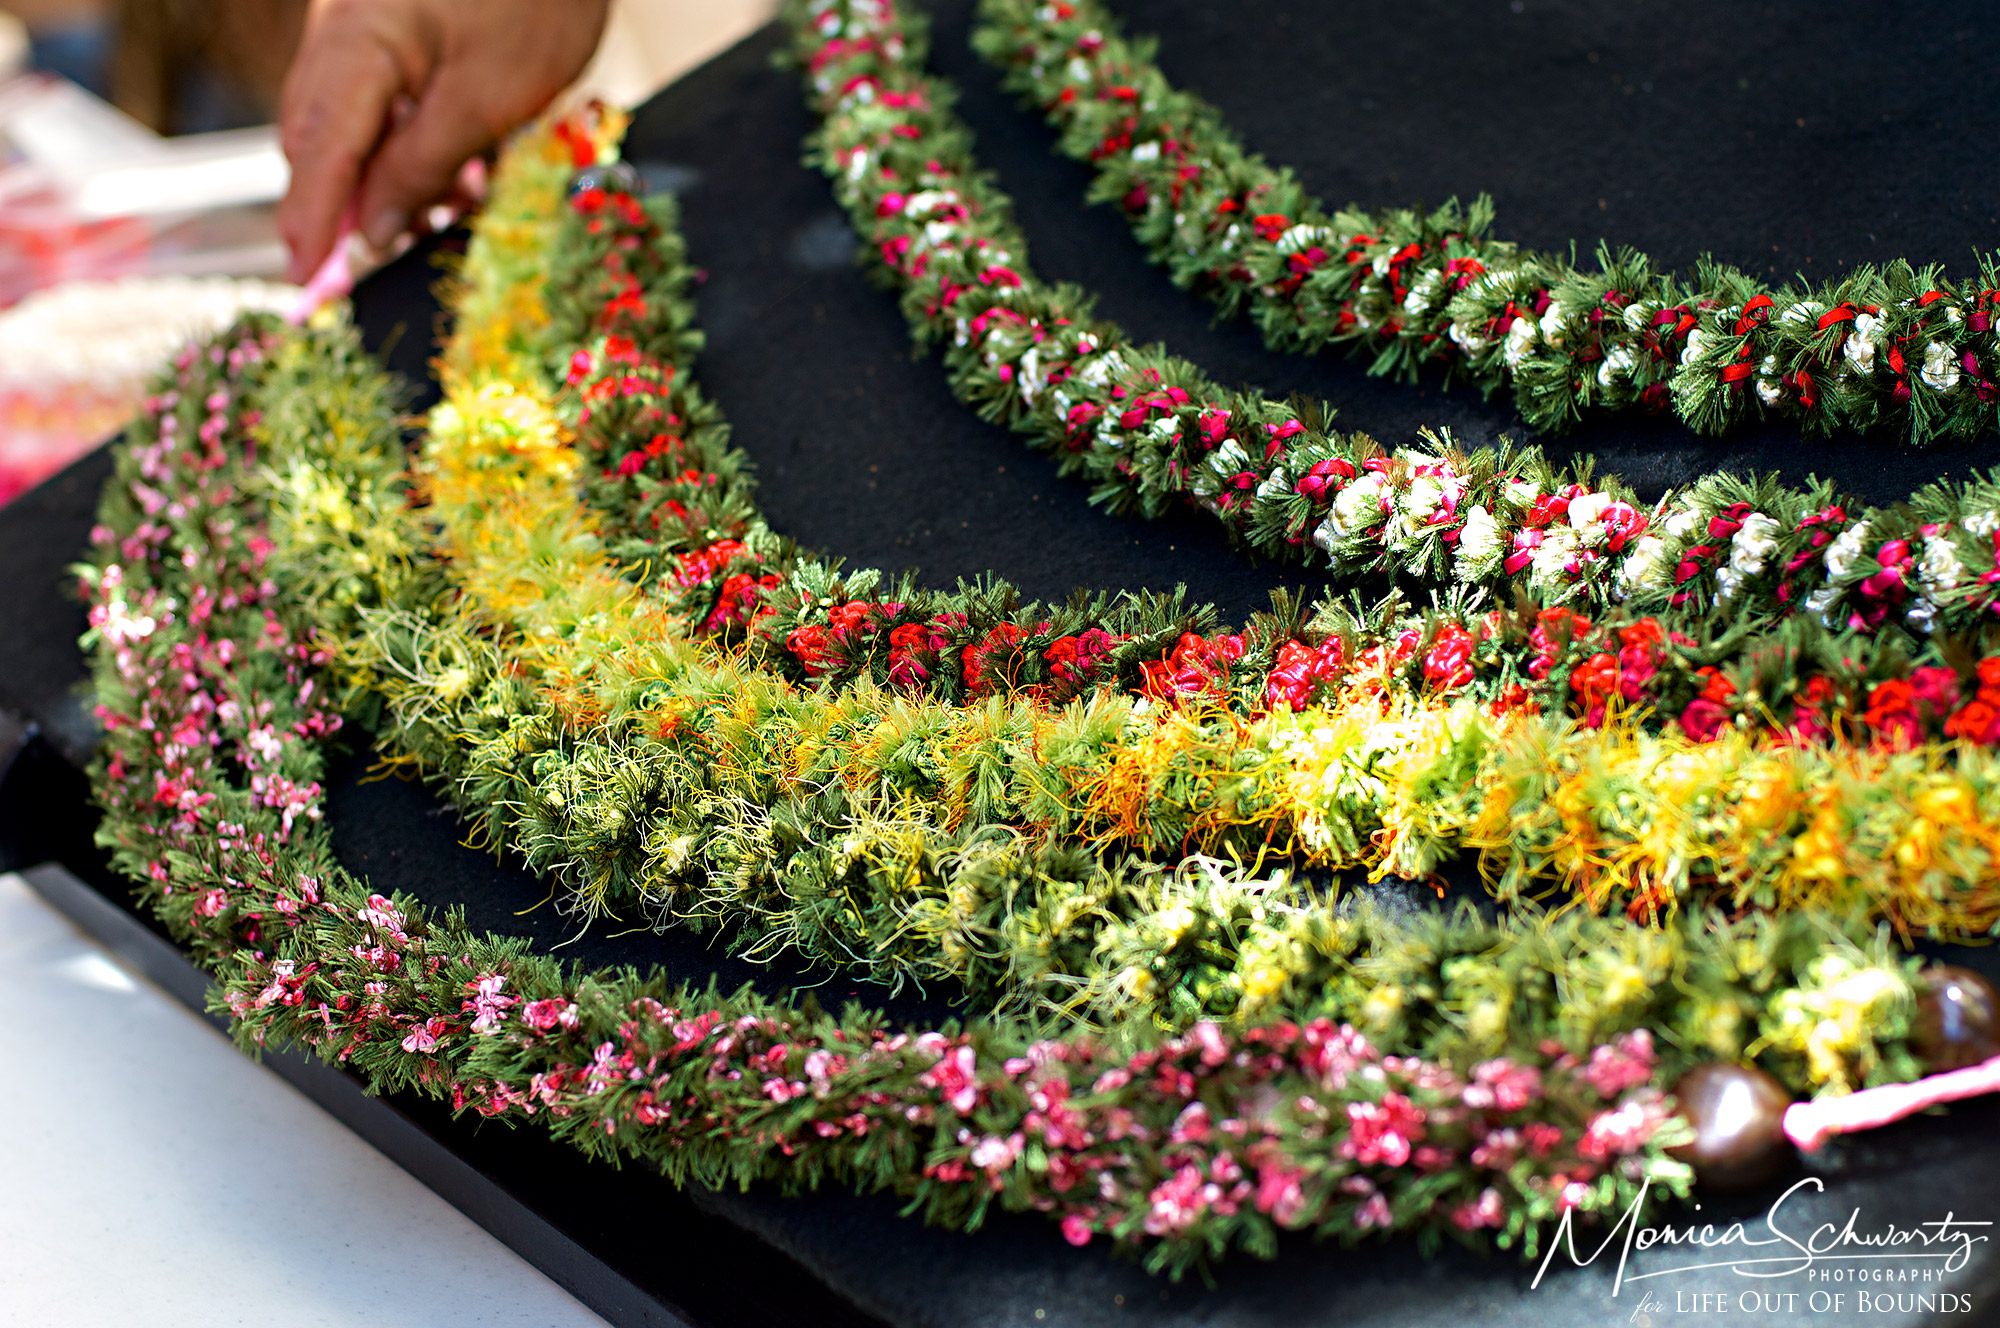 Ribbon-and-fabric-lei-for-sale-at-the-Lei-Day-celebrations-in-Honolulu-Hawaii-2013